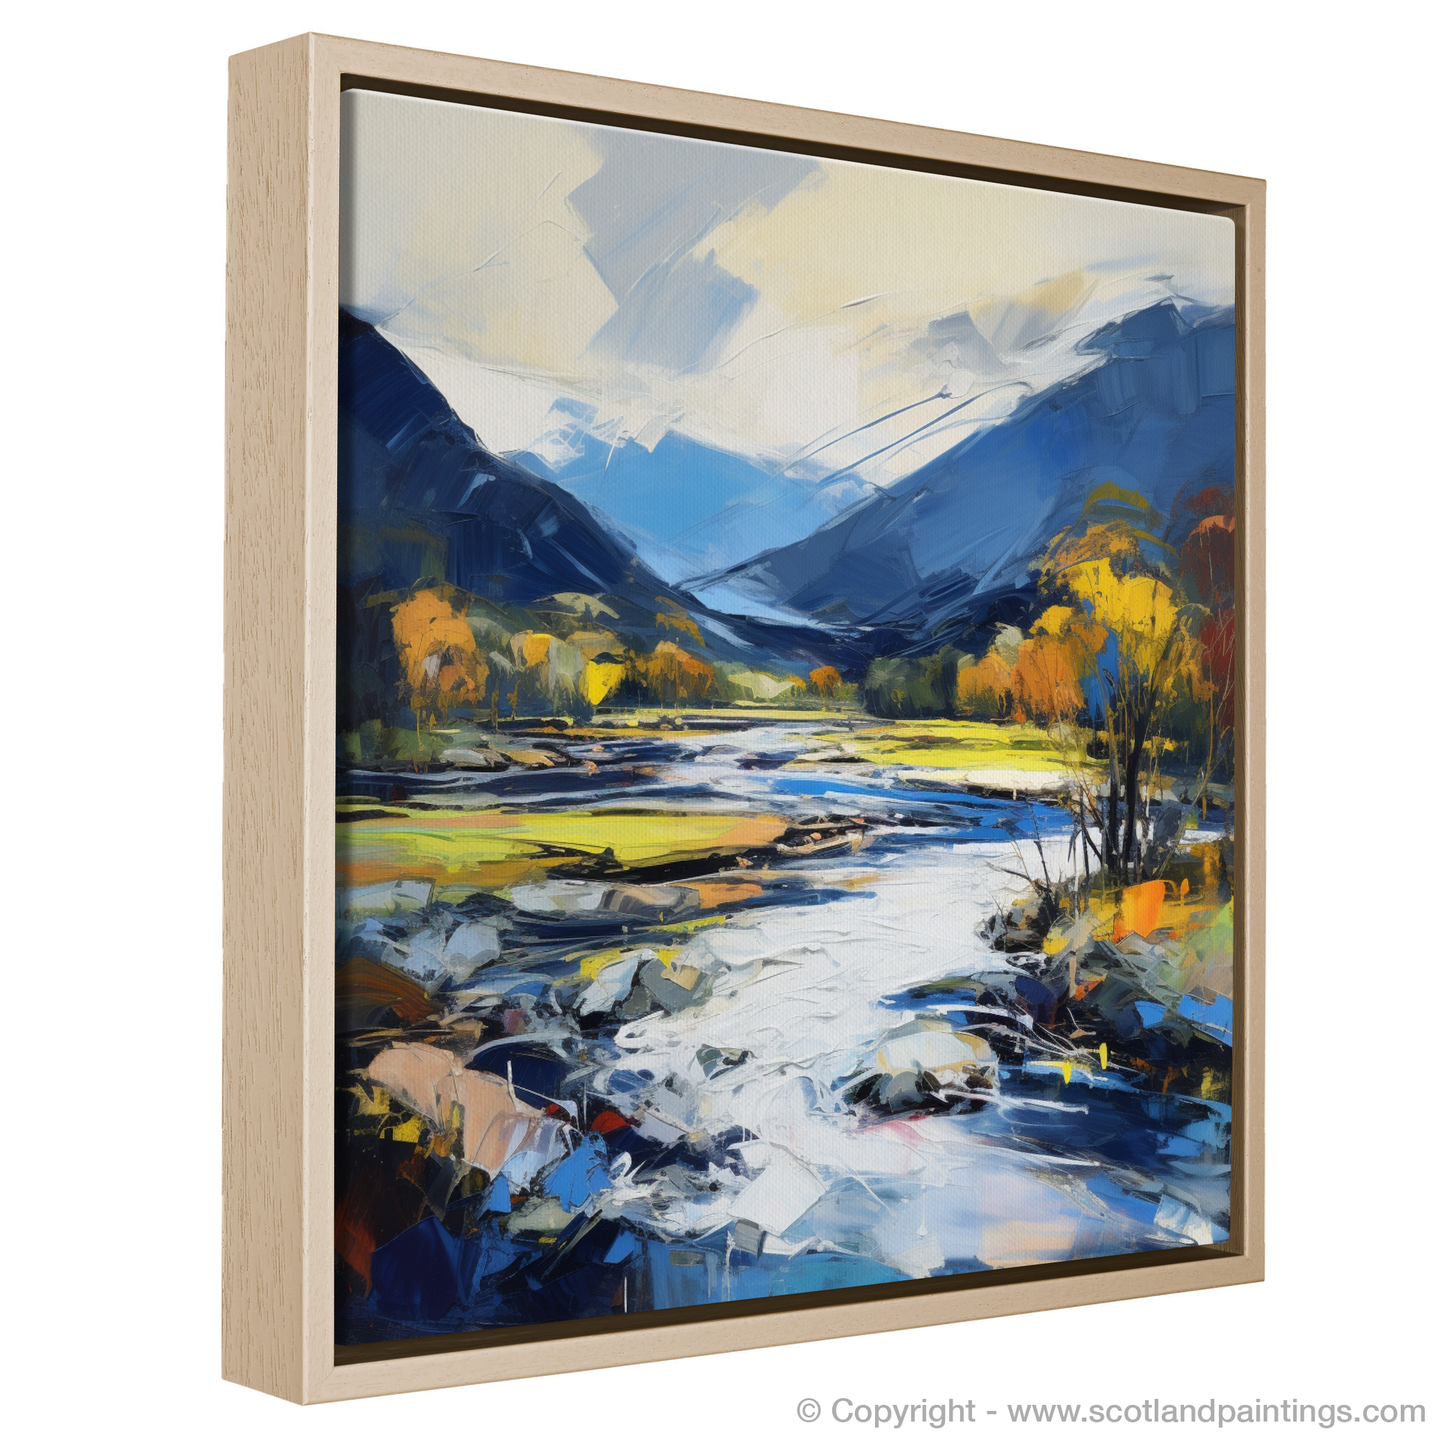 Painting and Art Print of River Spey, Highlands entitled "Wild Spey: An Expressionist Ode to the Highlands".